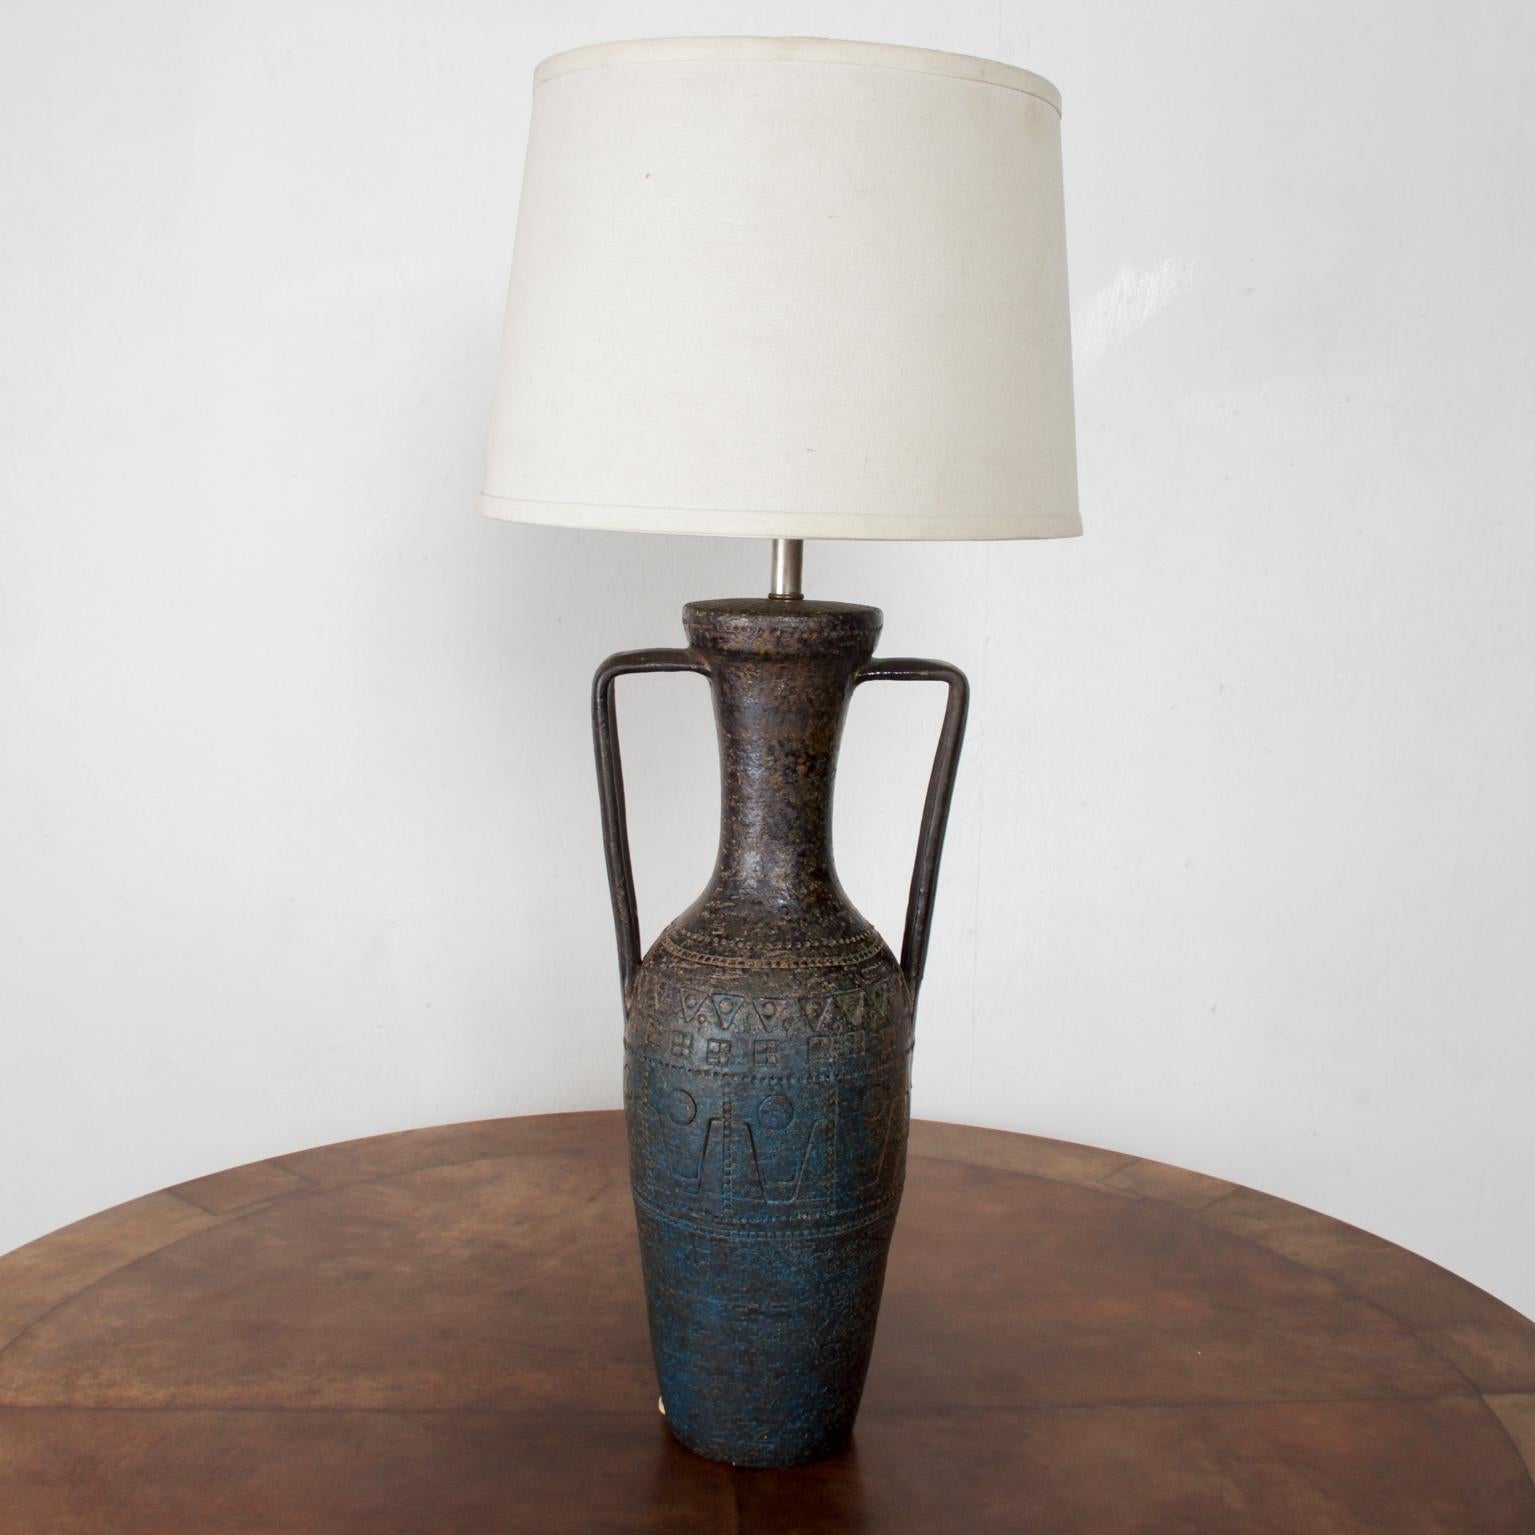 For your consideration: A textured table lamp, ceramic blue Rimini by Bitossi Italy 1950s table lamp measures: 26 1/2